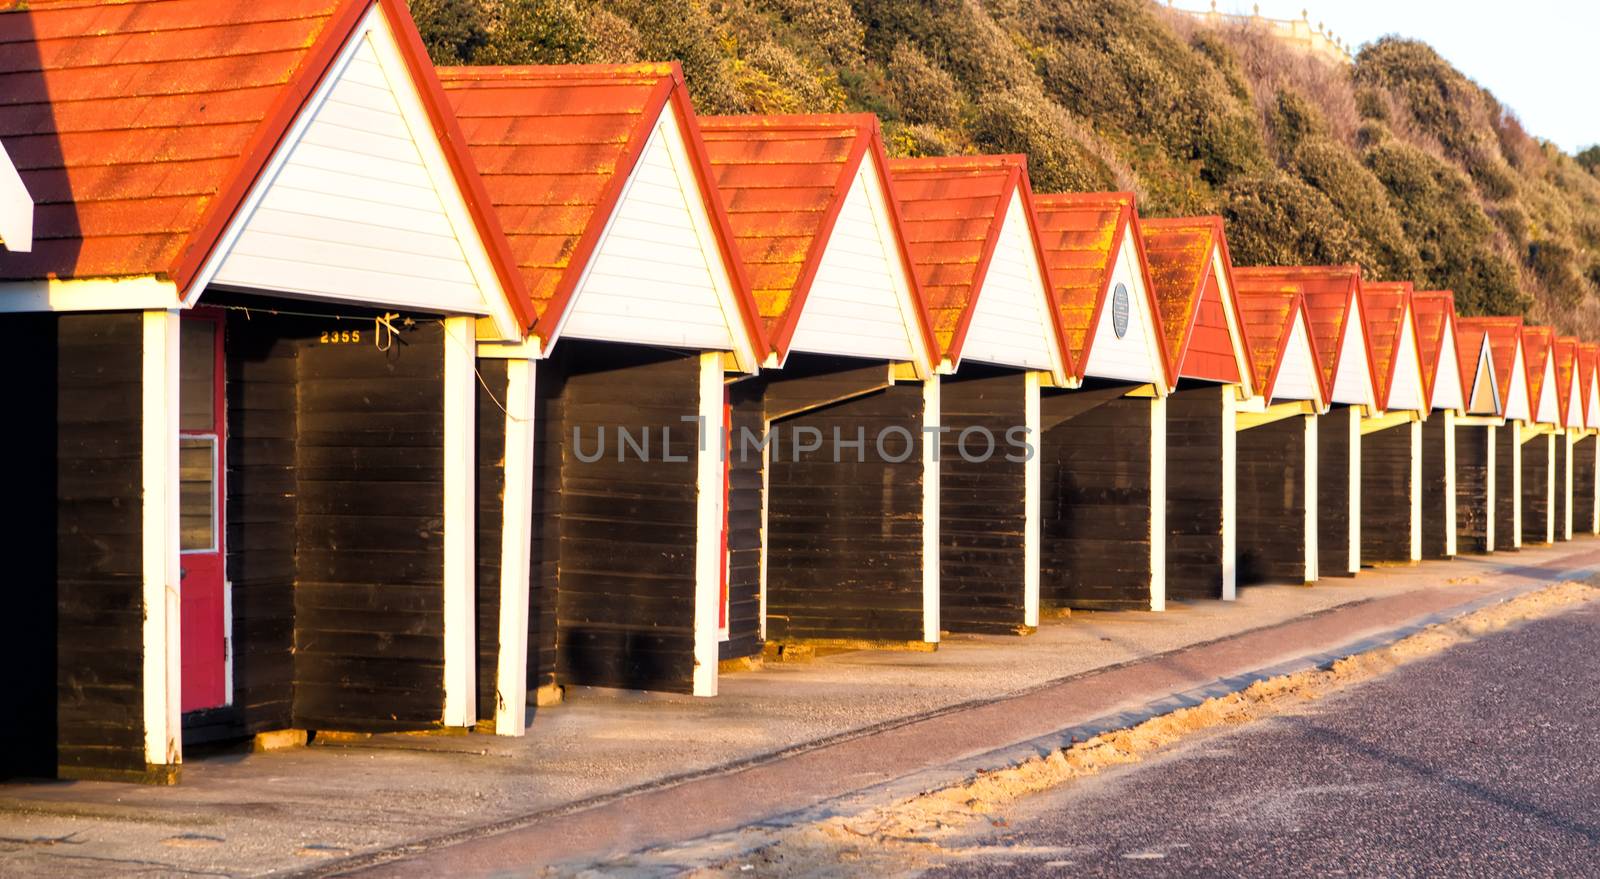 Beach huts have been a prominent feature of the seafront at Bournemouth since the 1930s.